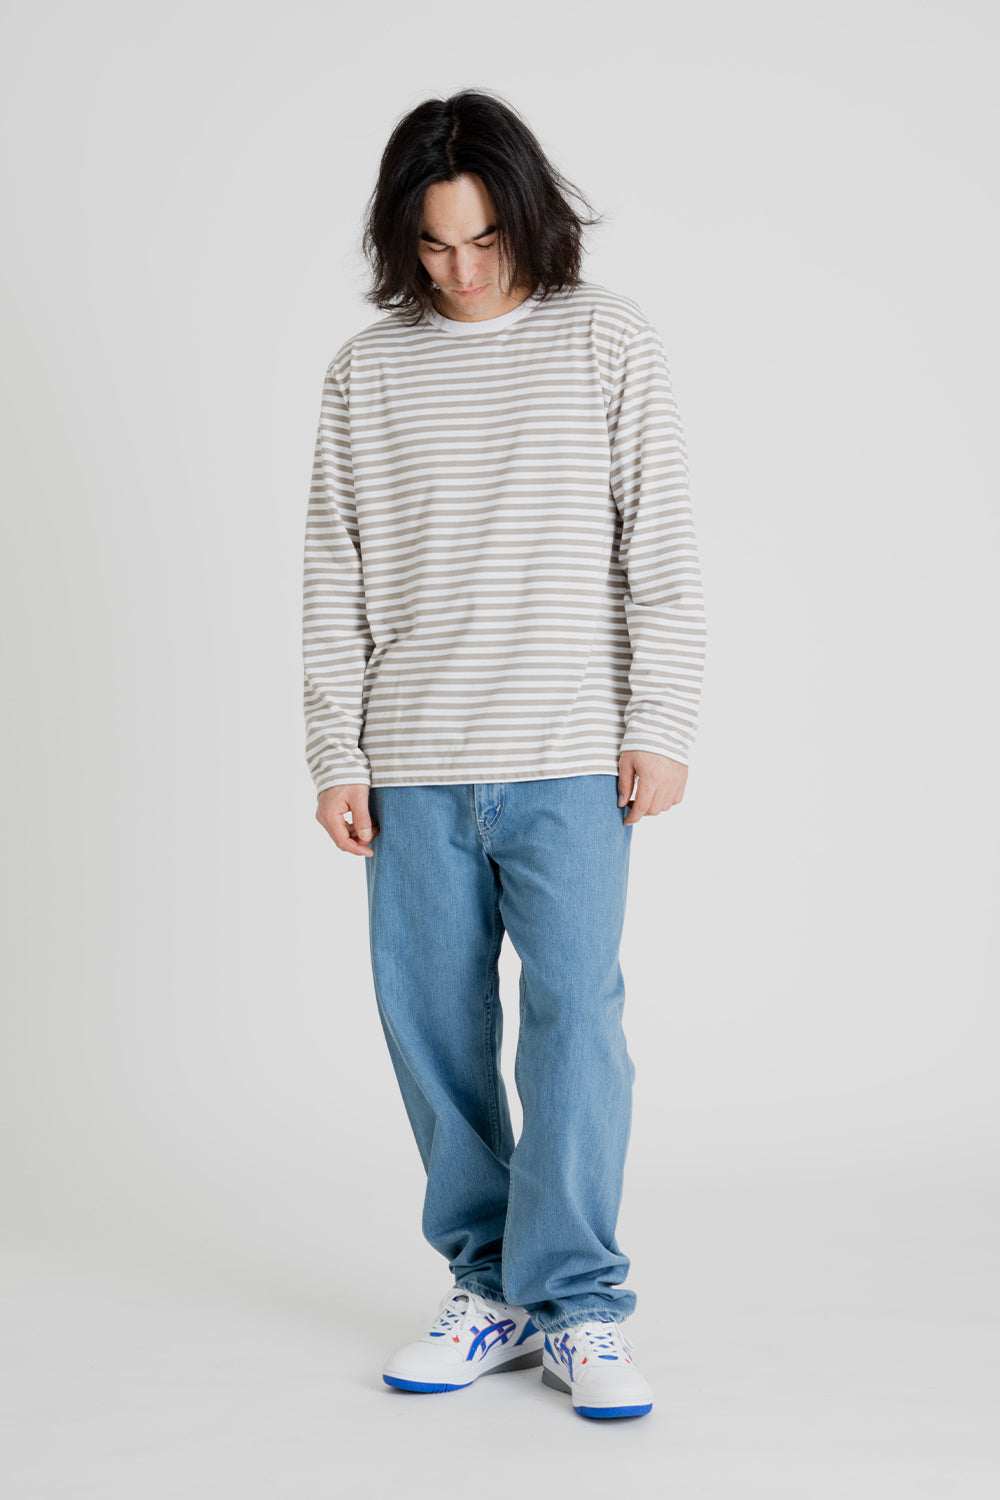 Nanamica Coolmax St Jersey L/S Tee in Taupe x White | Wallace Mercanti